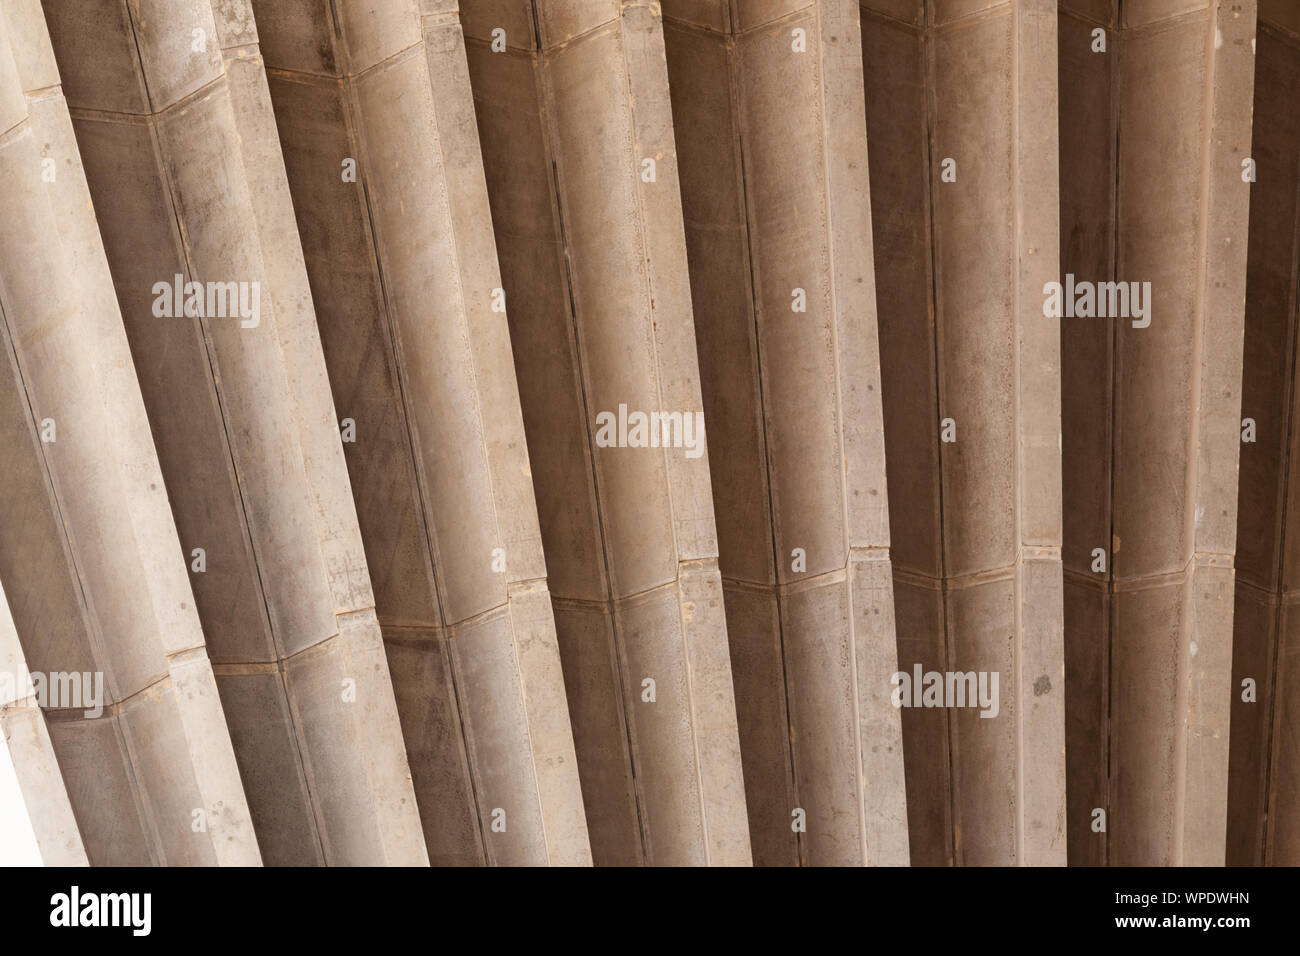 Sydney Opera House Ribs. Abstract detail under sails. Concrete. Stock Photo